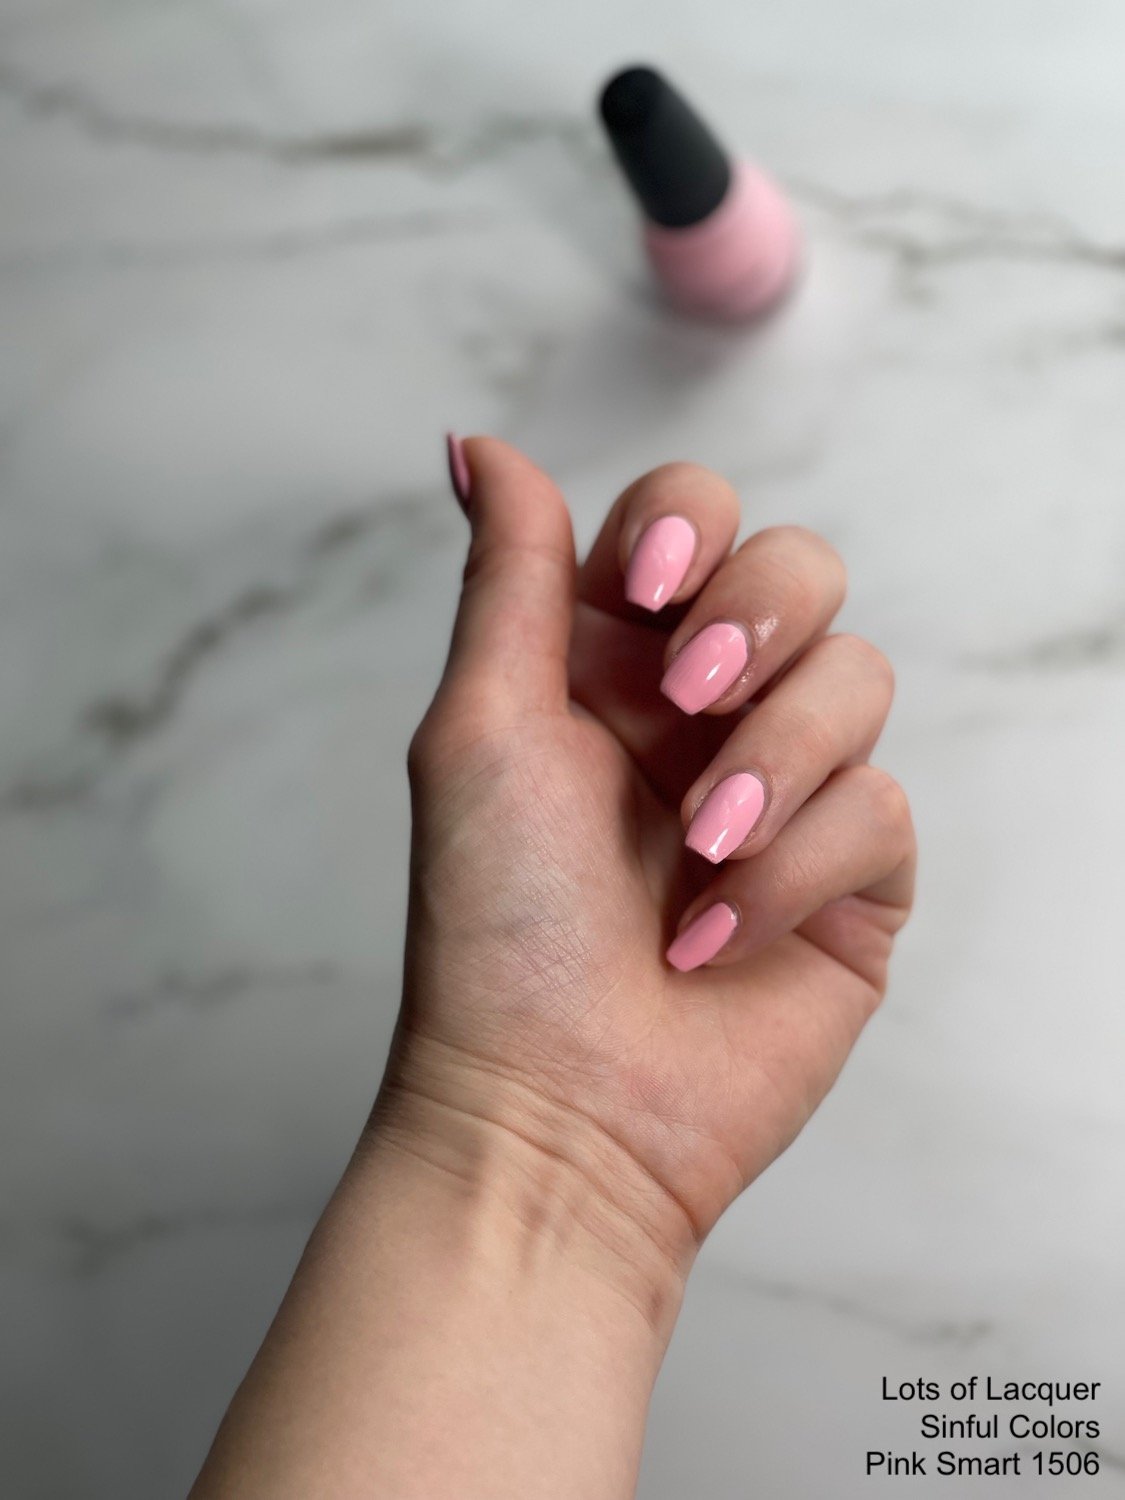 What color nails do guys prefer on girls? - Quora